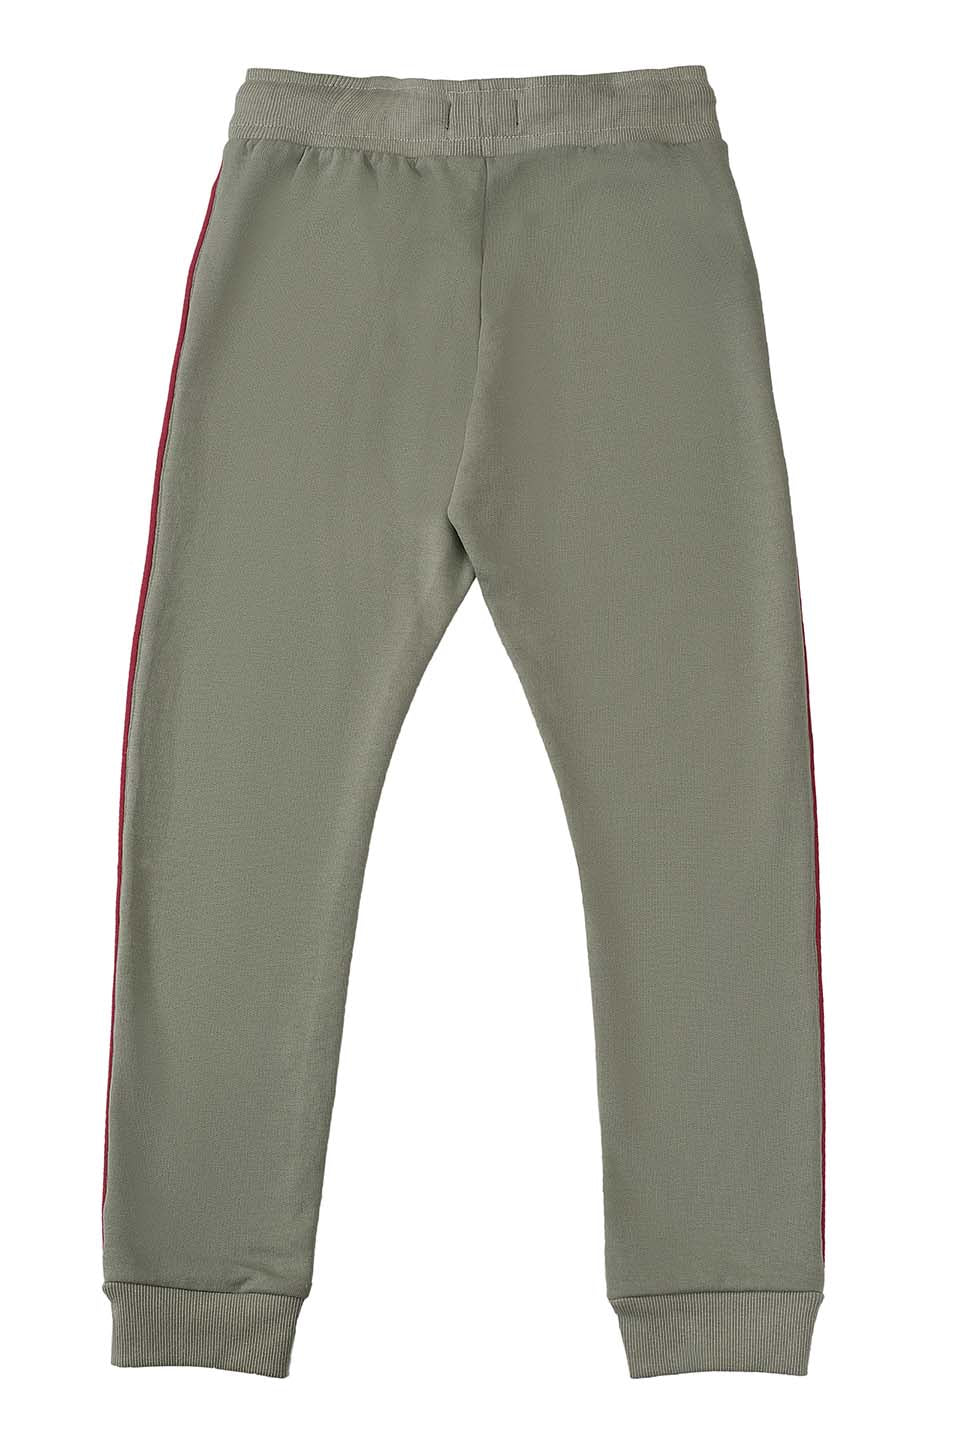 KDS-GC-12632 PULL ON TROUSER SEA GREEN